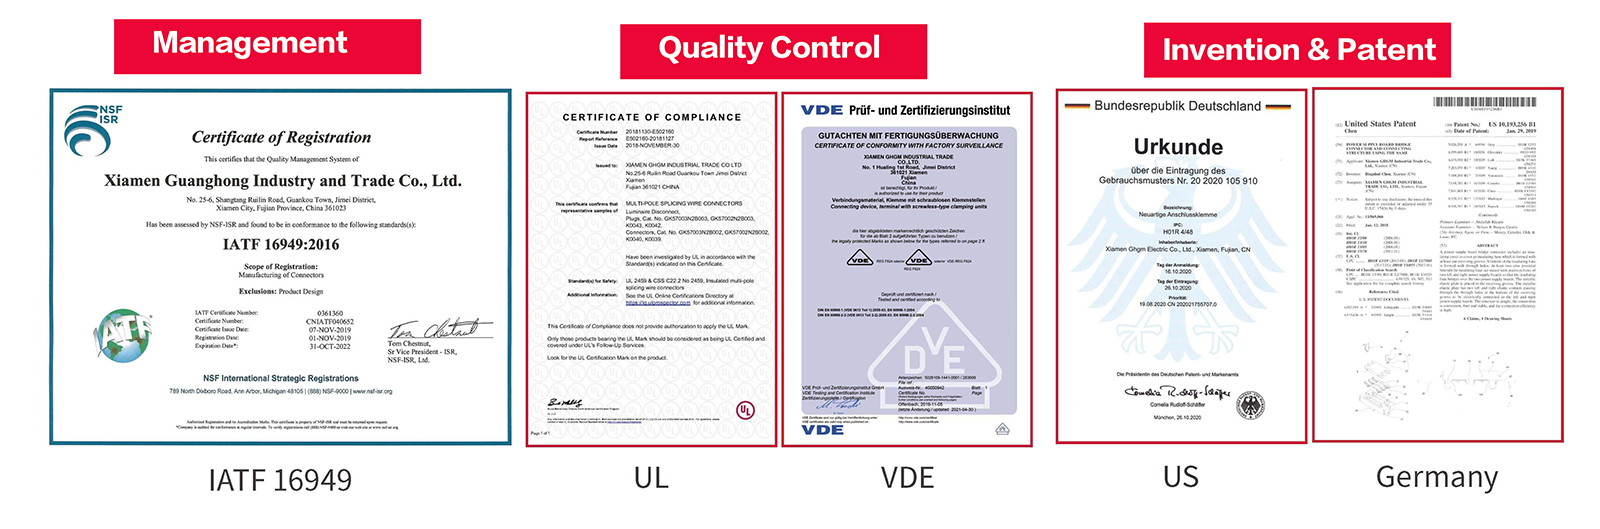 GHGM certificate, qualtity control, invention and patents.jpg